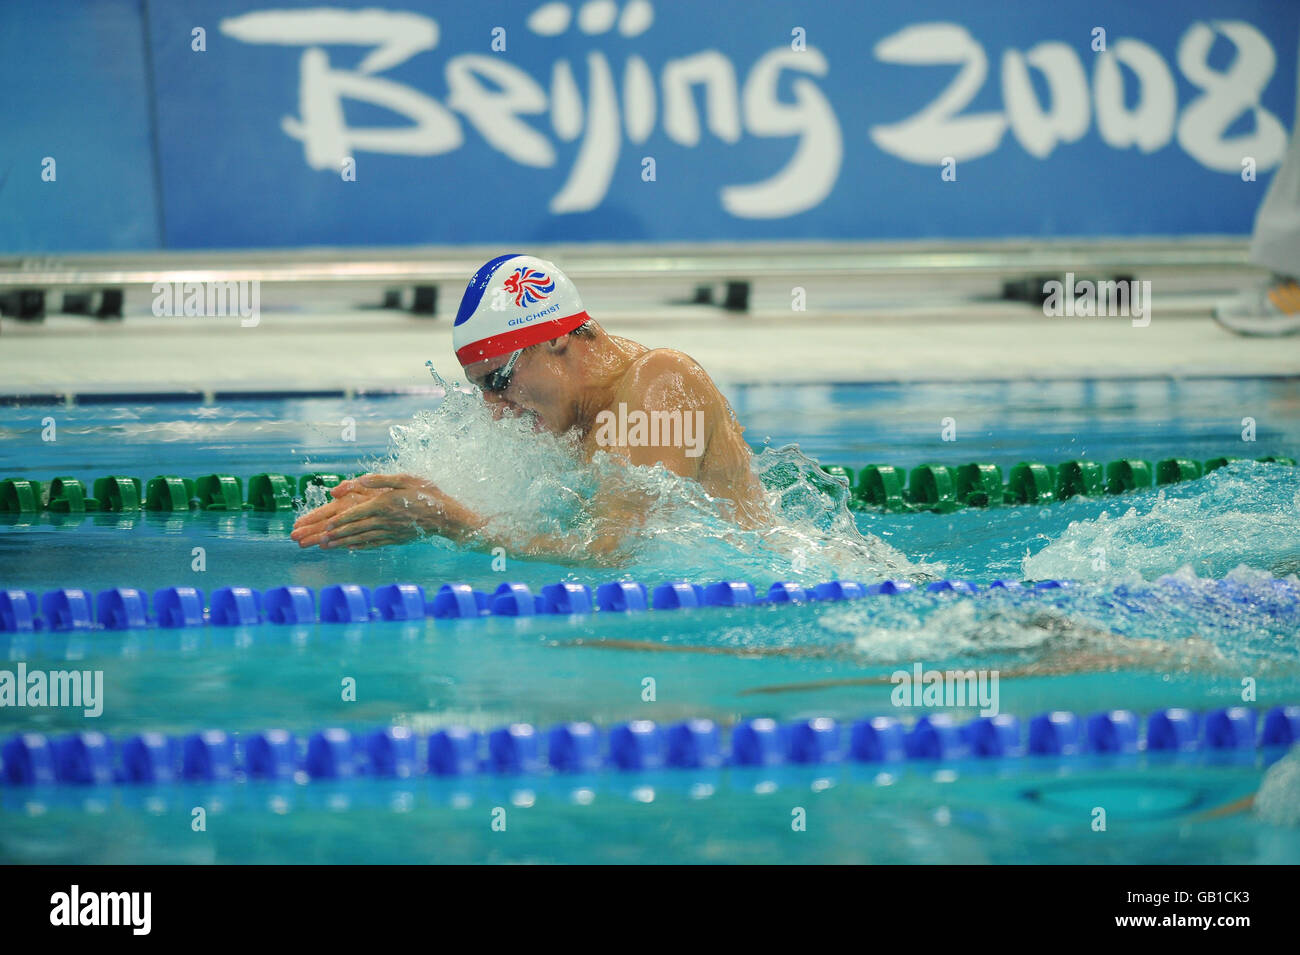 Great Britain's Krisopher Gilchrist in action in his heat of the Men's 100m Breaststroke at the National Aquatic Center in Beijing, China. Stock Photo